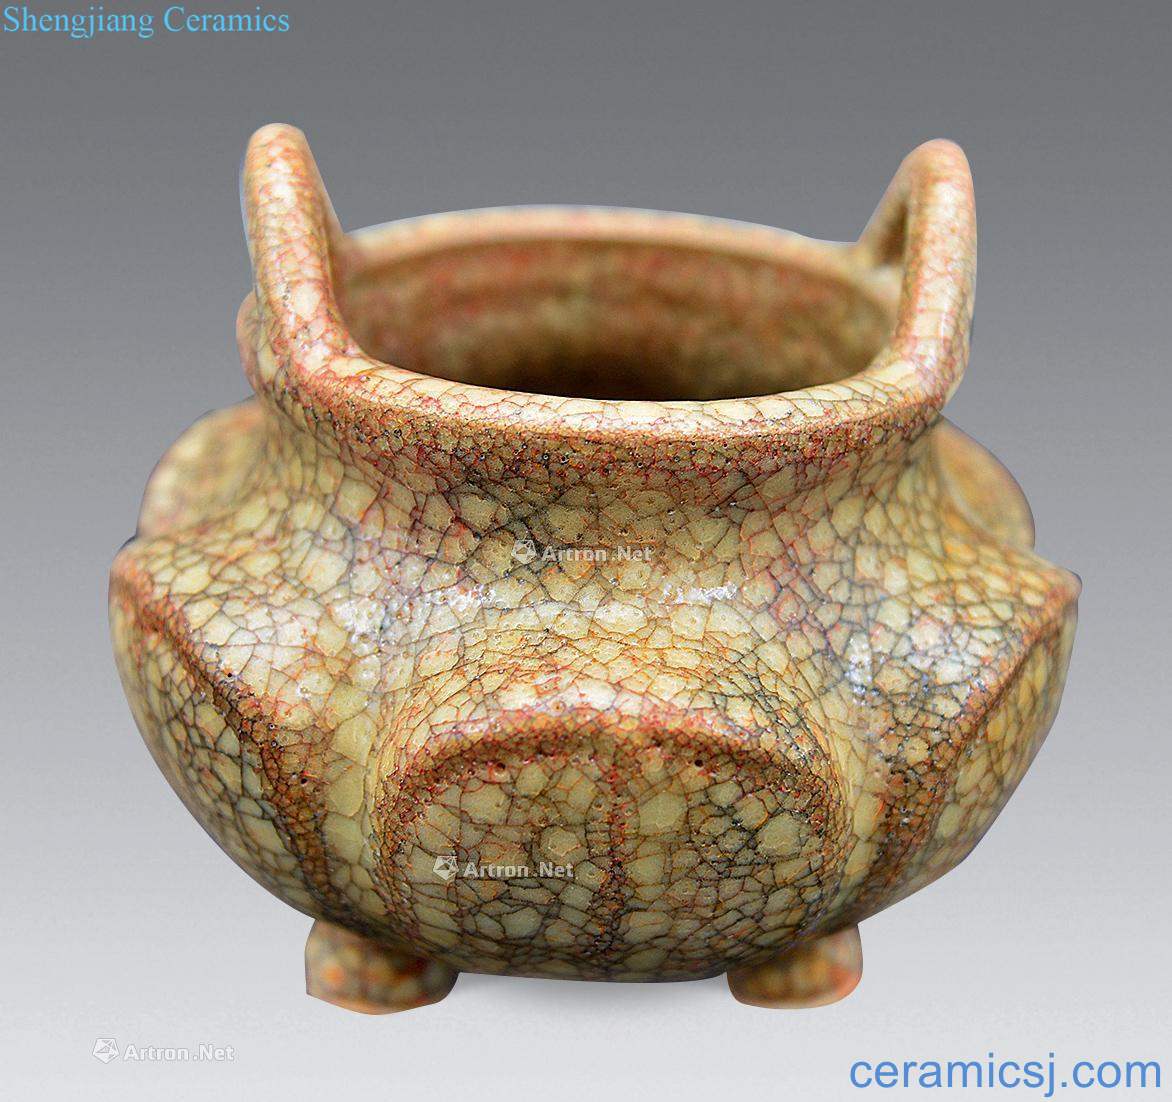 The song dynasty Eye elder brother kiln lotus-shaped furnace with three legs